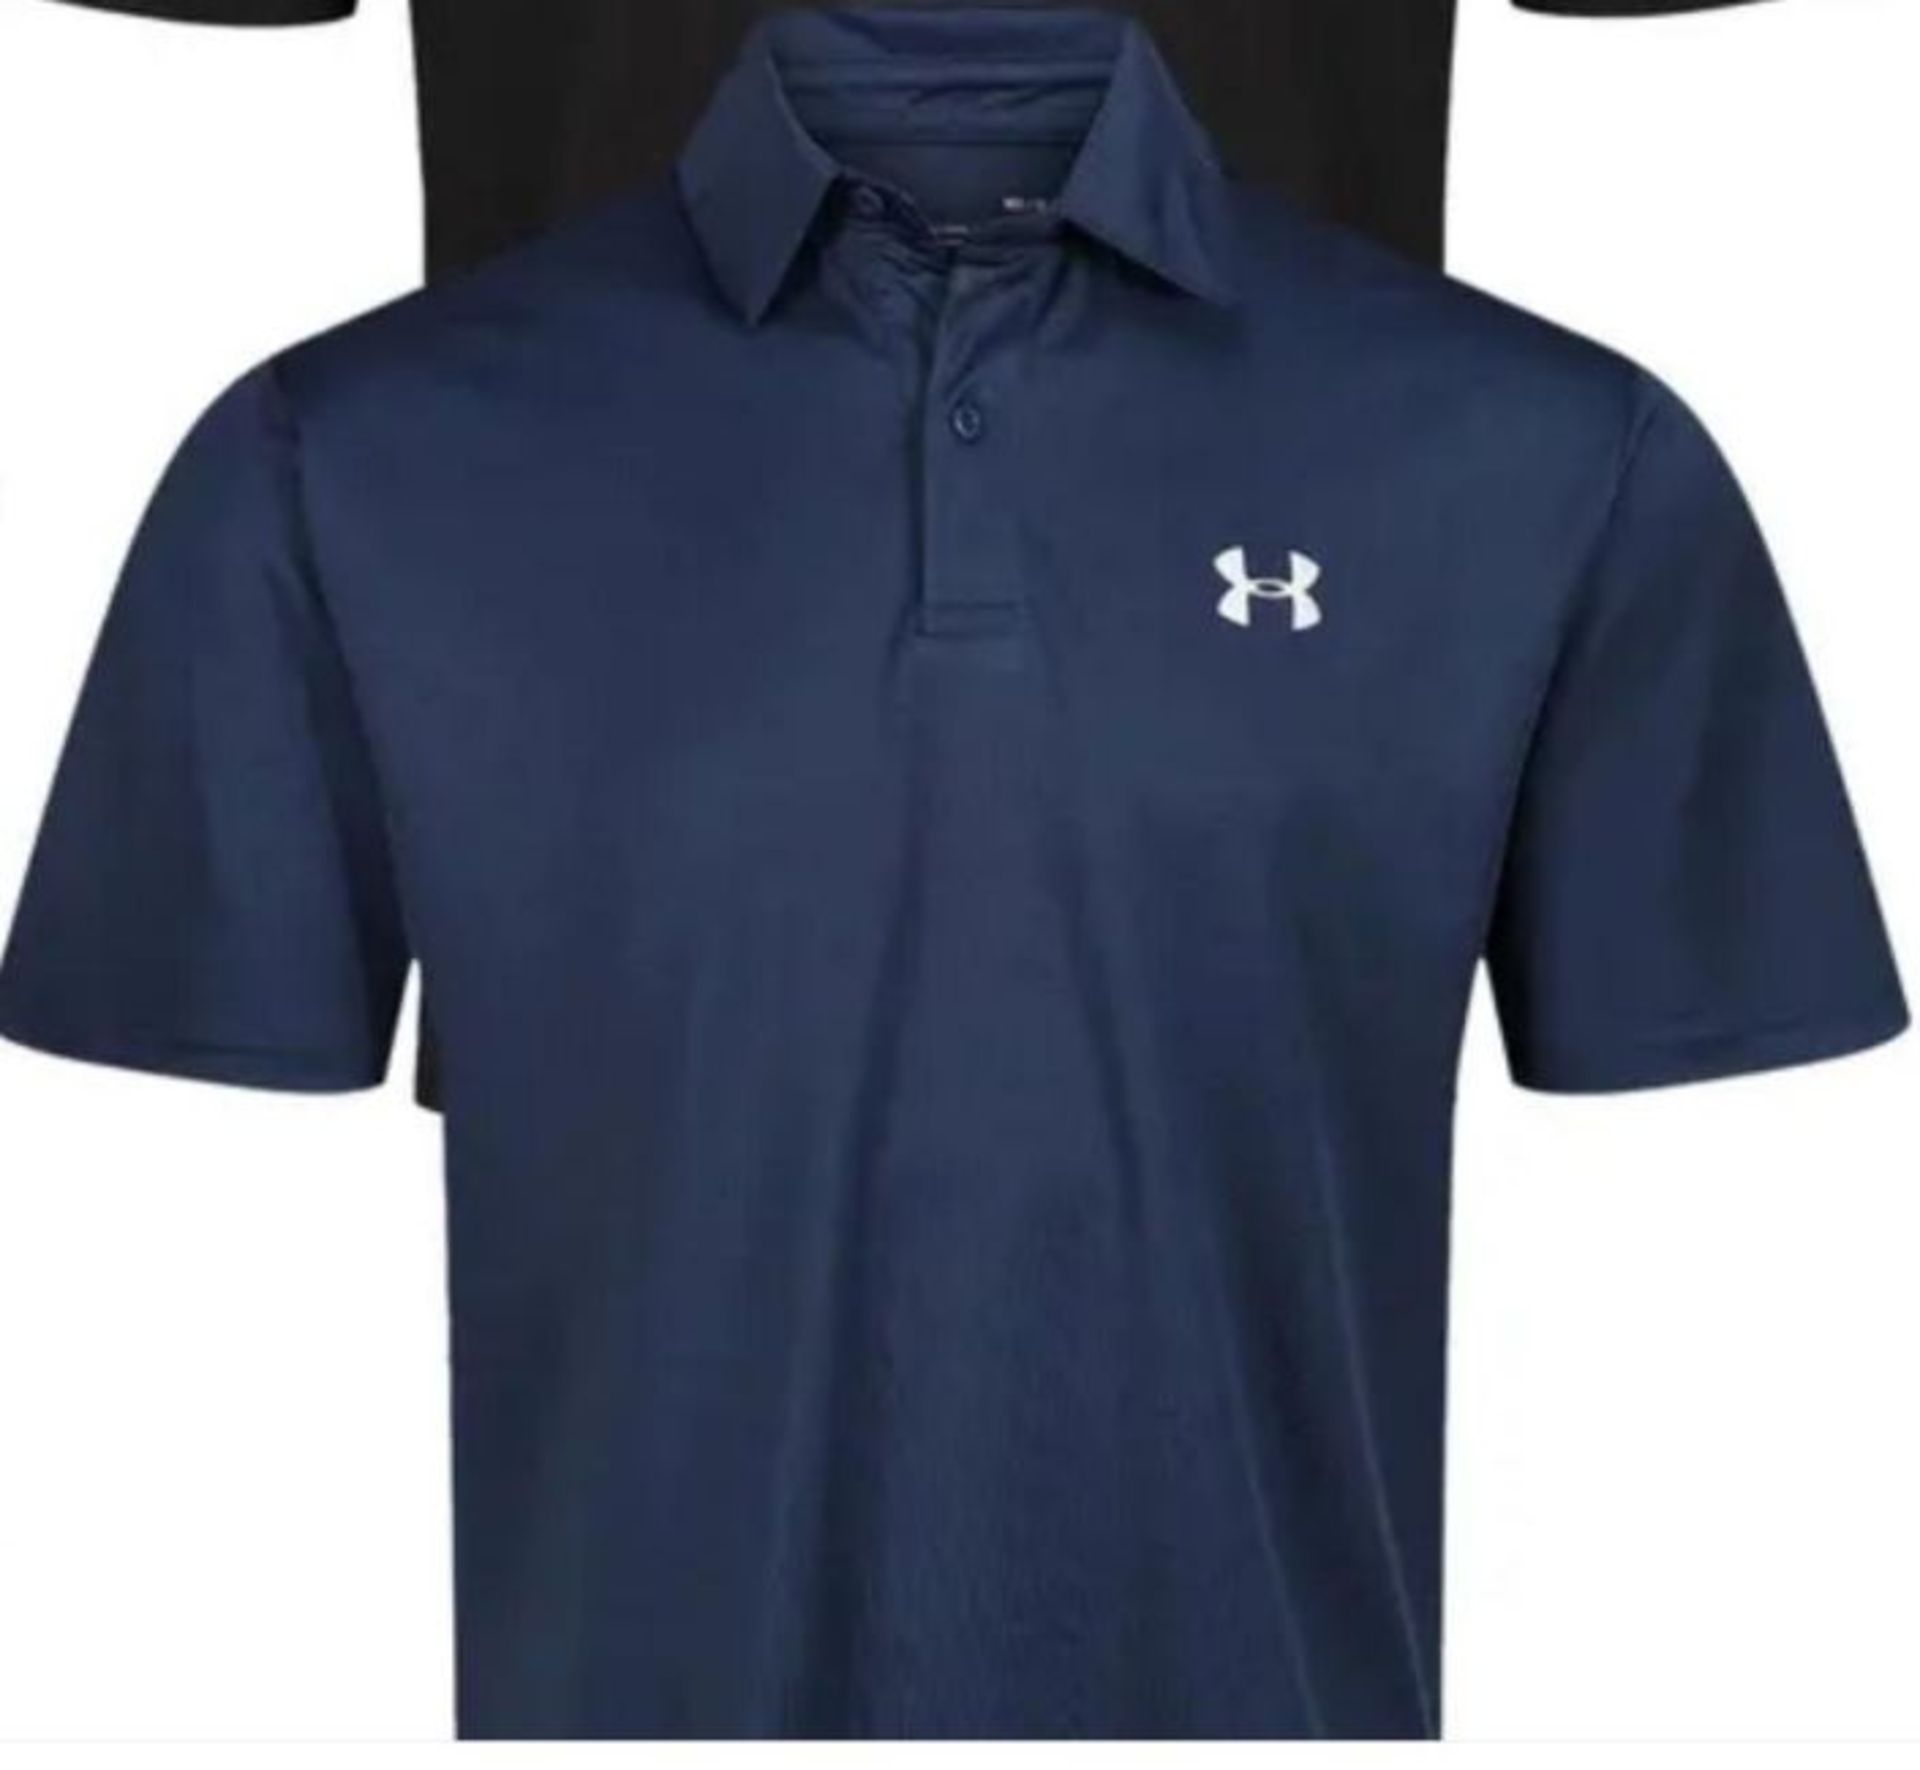 Mens Breathable Under Armour Polo Shirt Navy Size XL